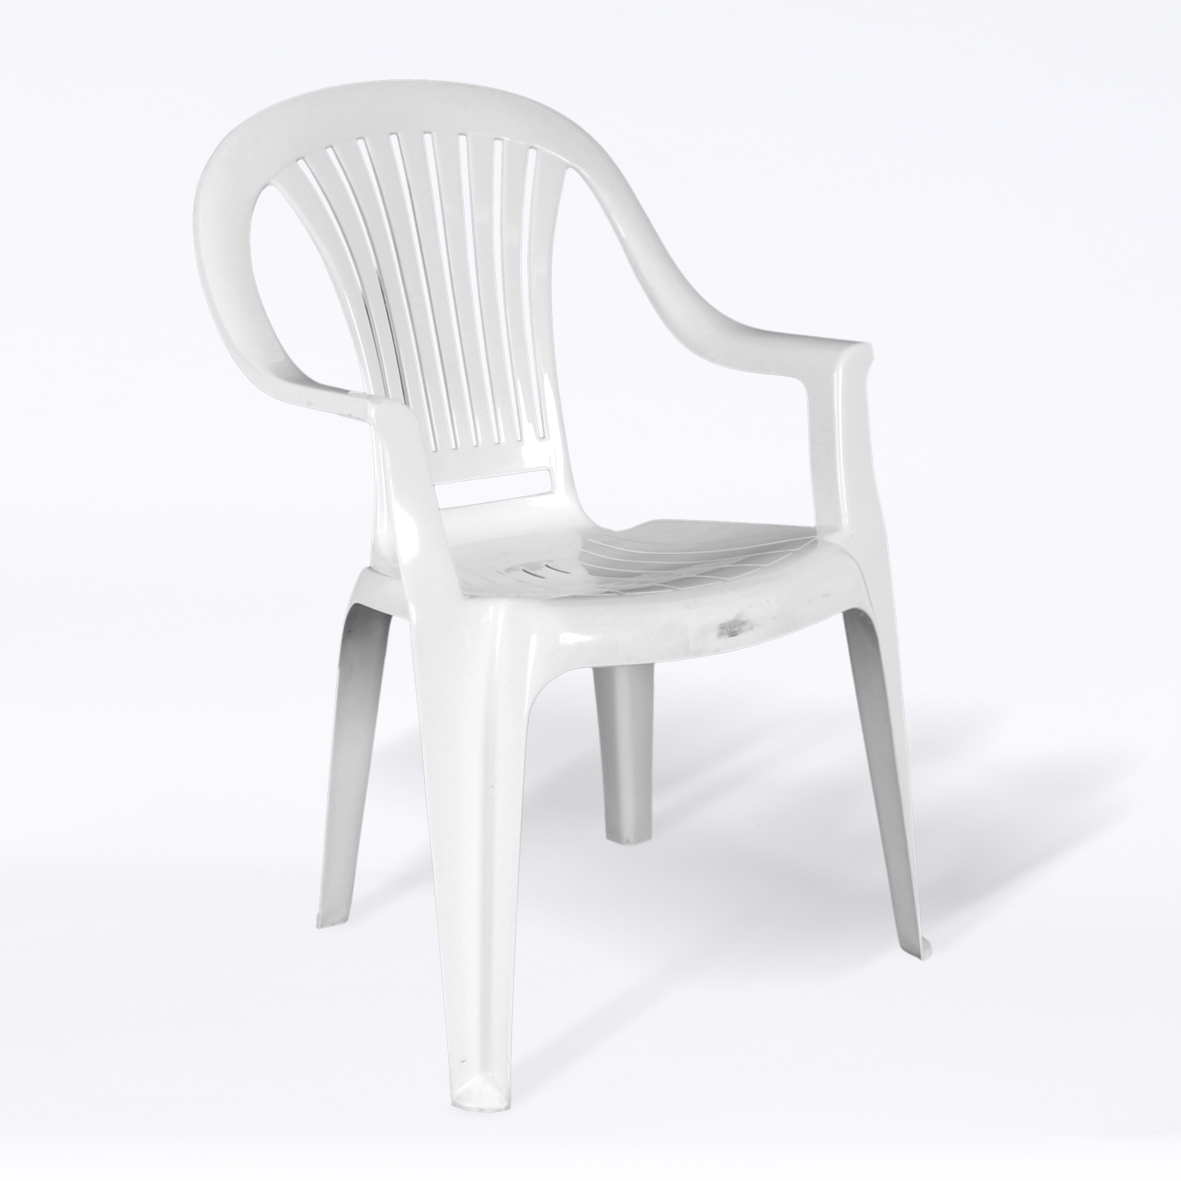 Garden White Chairs | All in One Event Hire